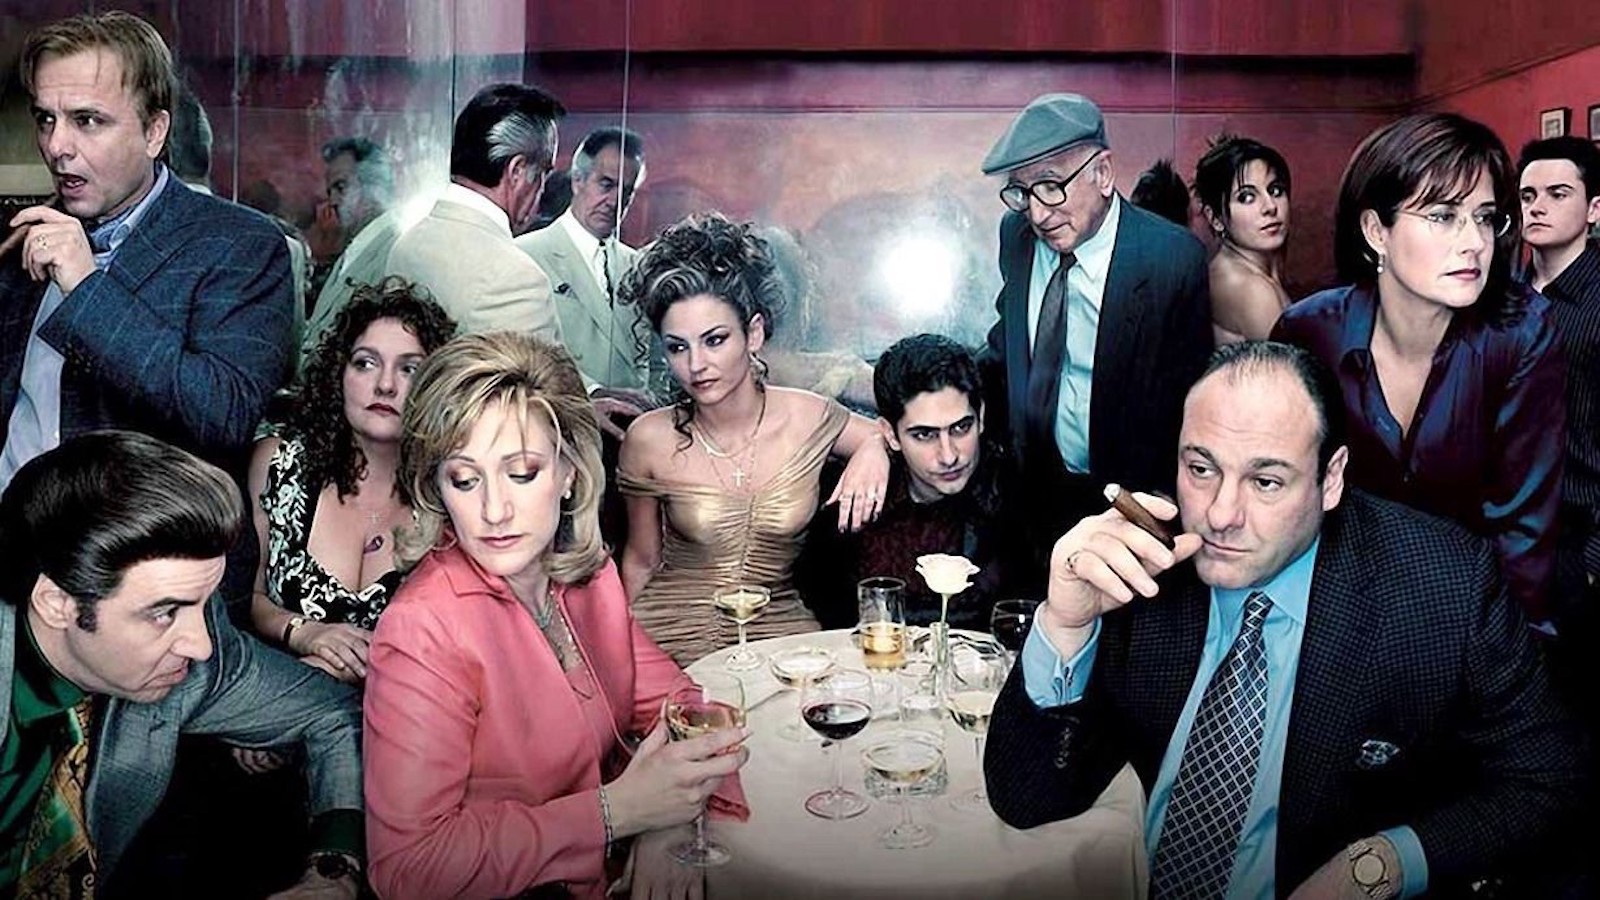 The Sopranos cast posing away from the camera at a restaurant